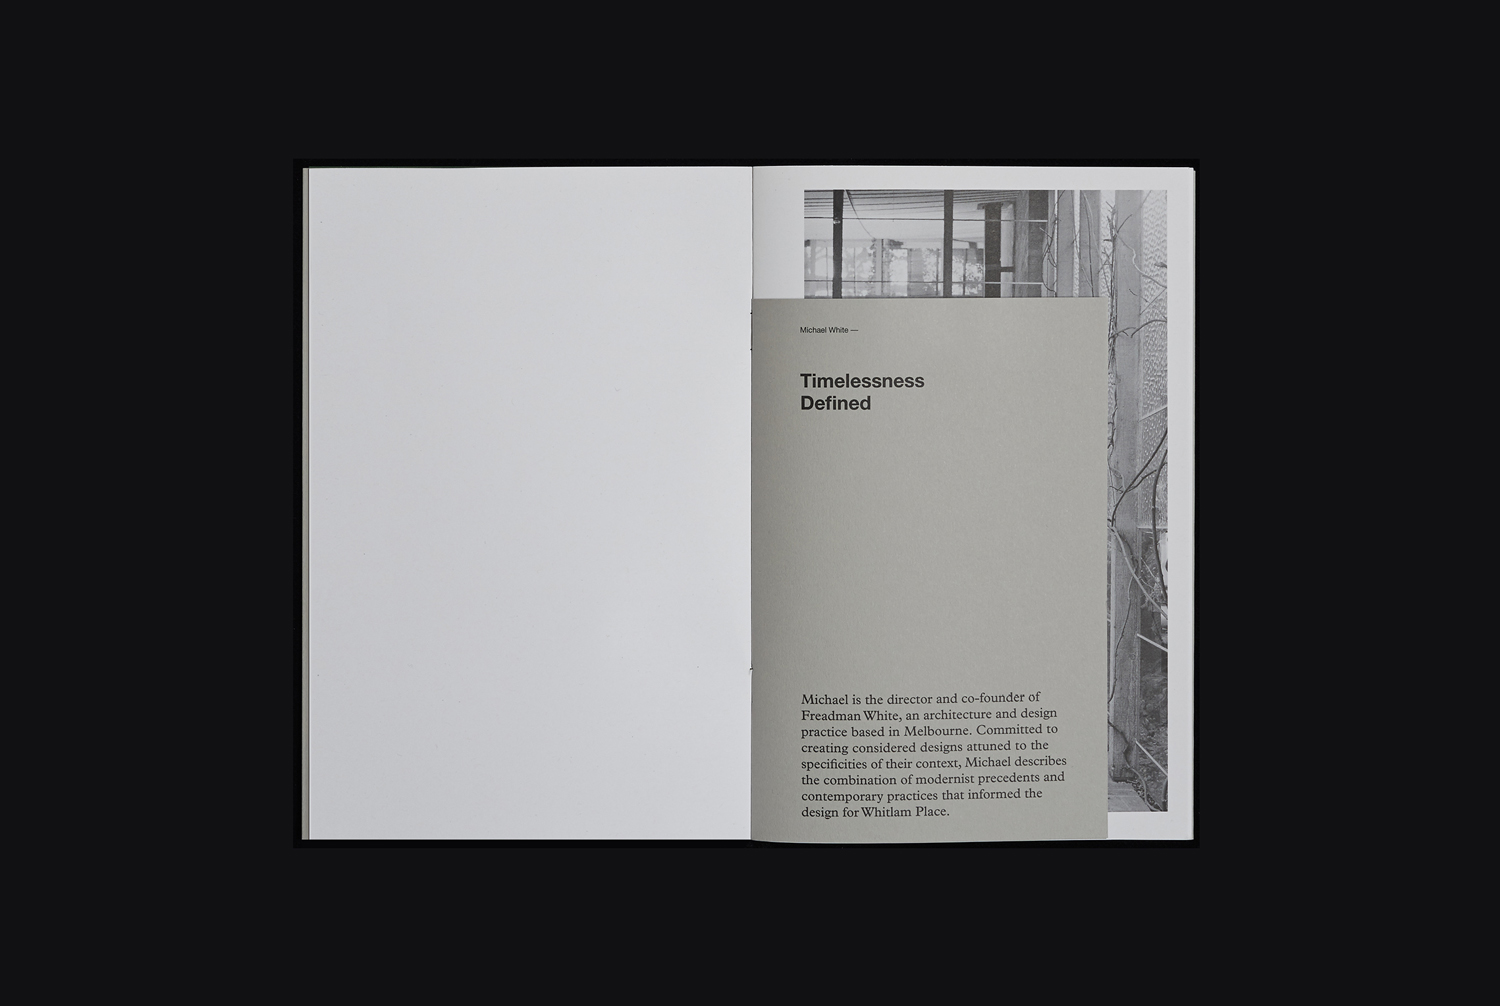 Reflection, a brochure designed by Studio Hi Ho for Fitzroy development Whitlam Place